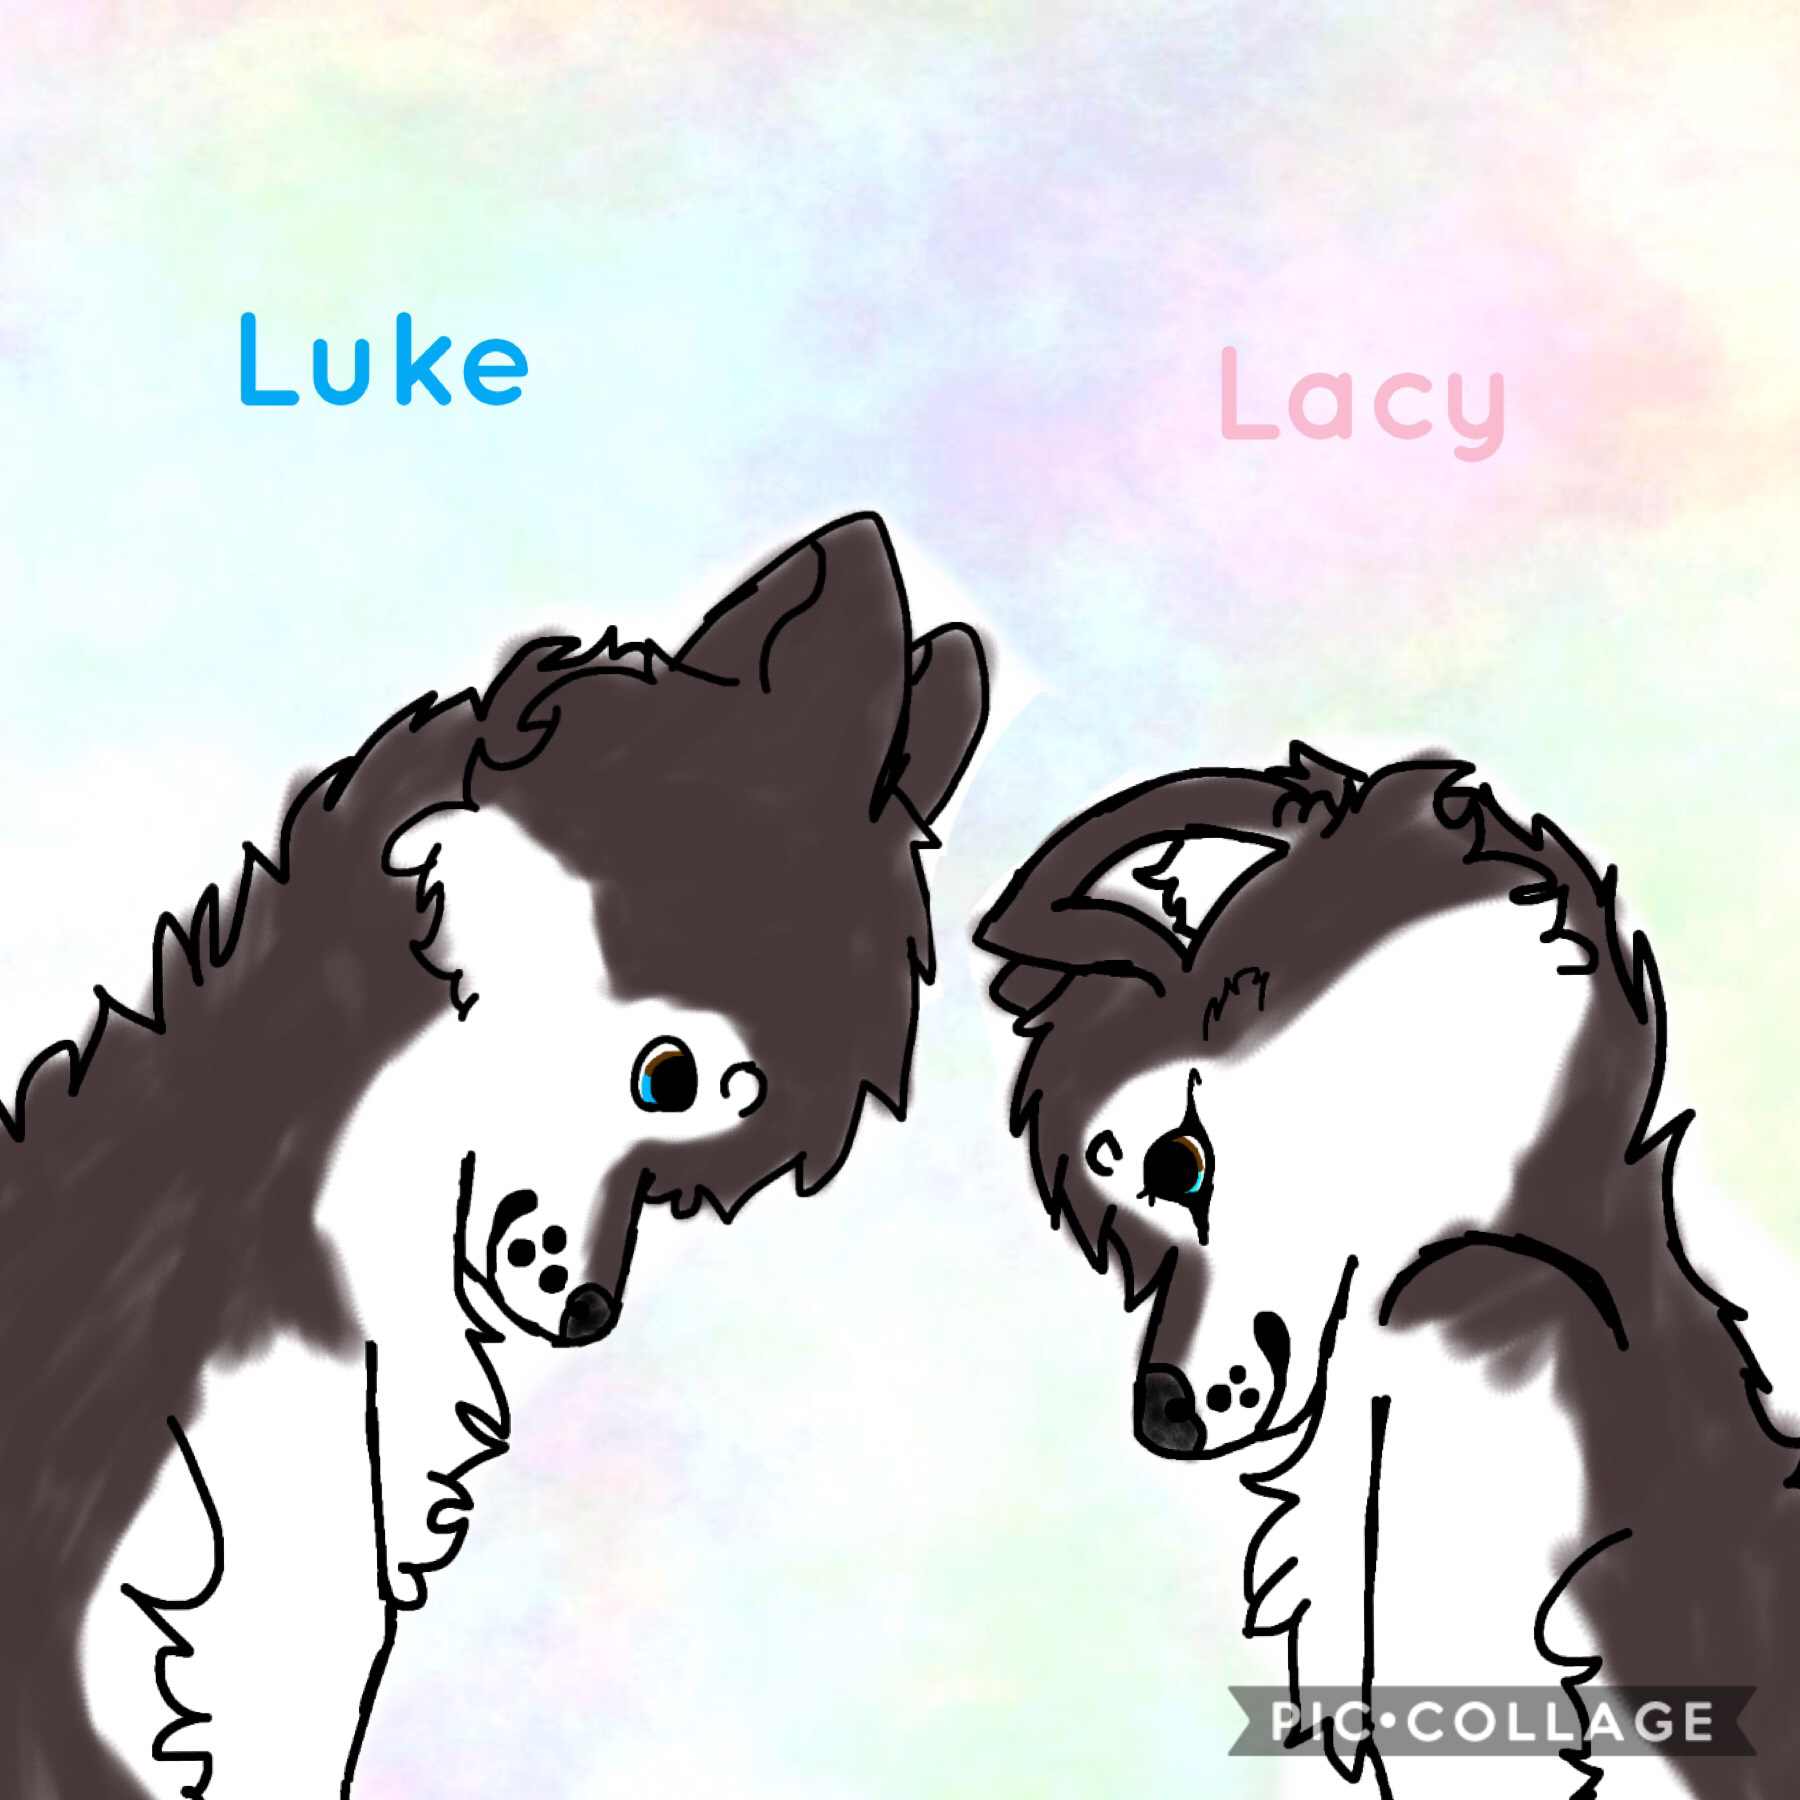 Luke and Lacy are twins and Luke is my character but Lacy is not she is my friend's.